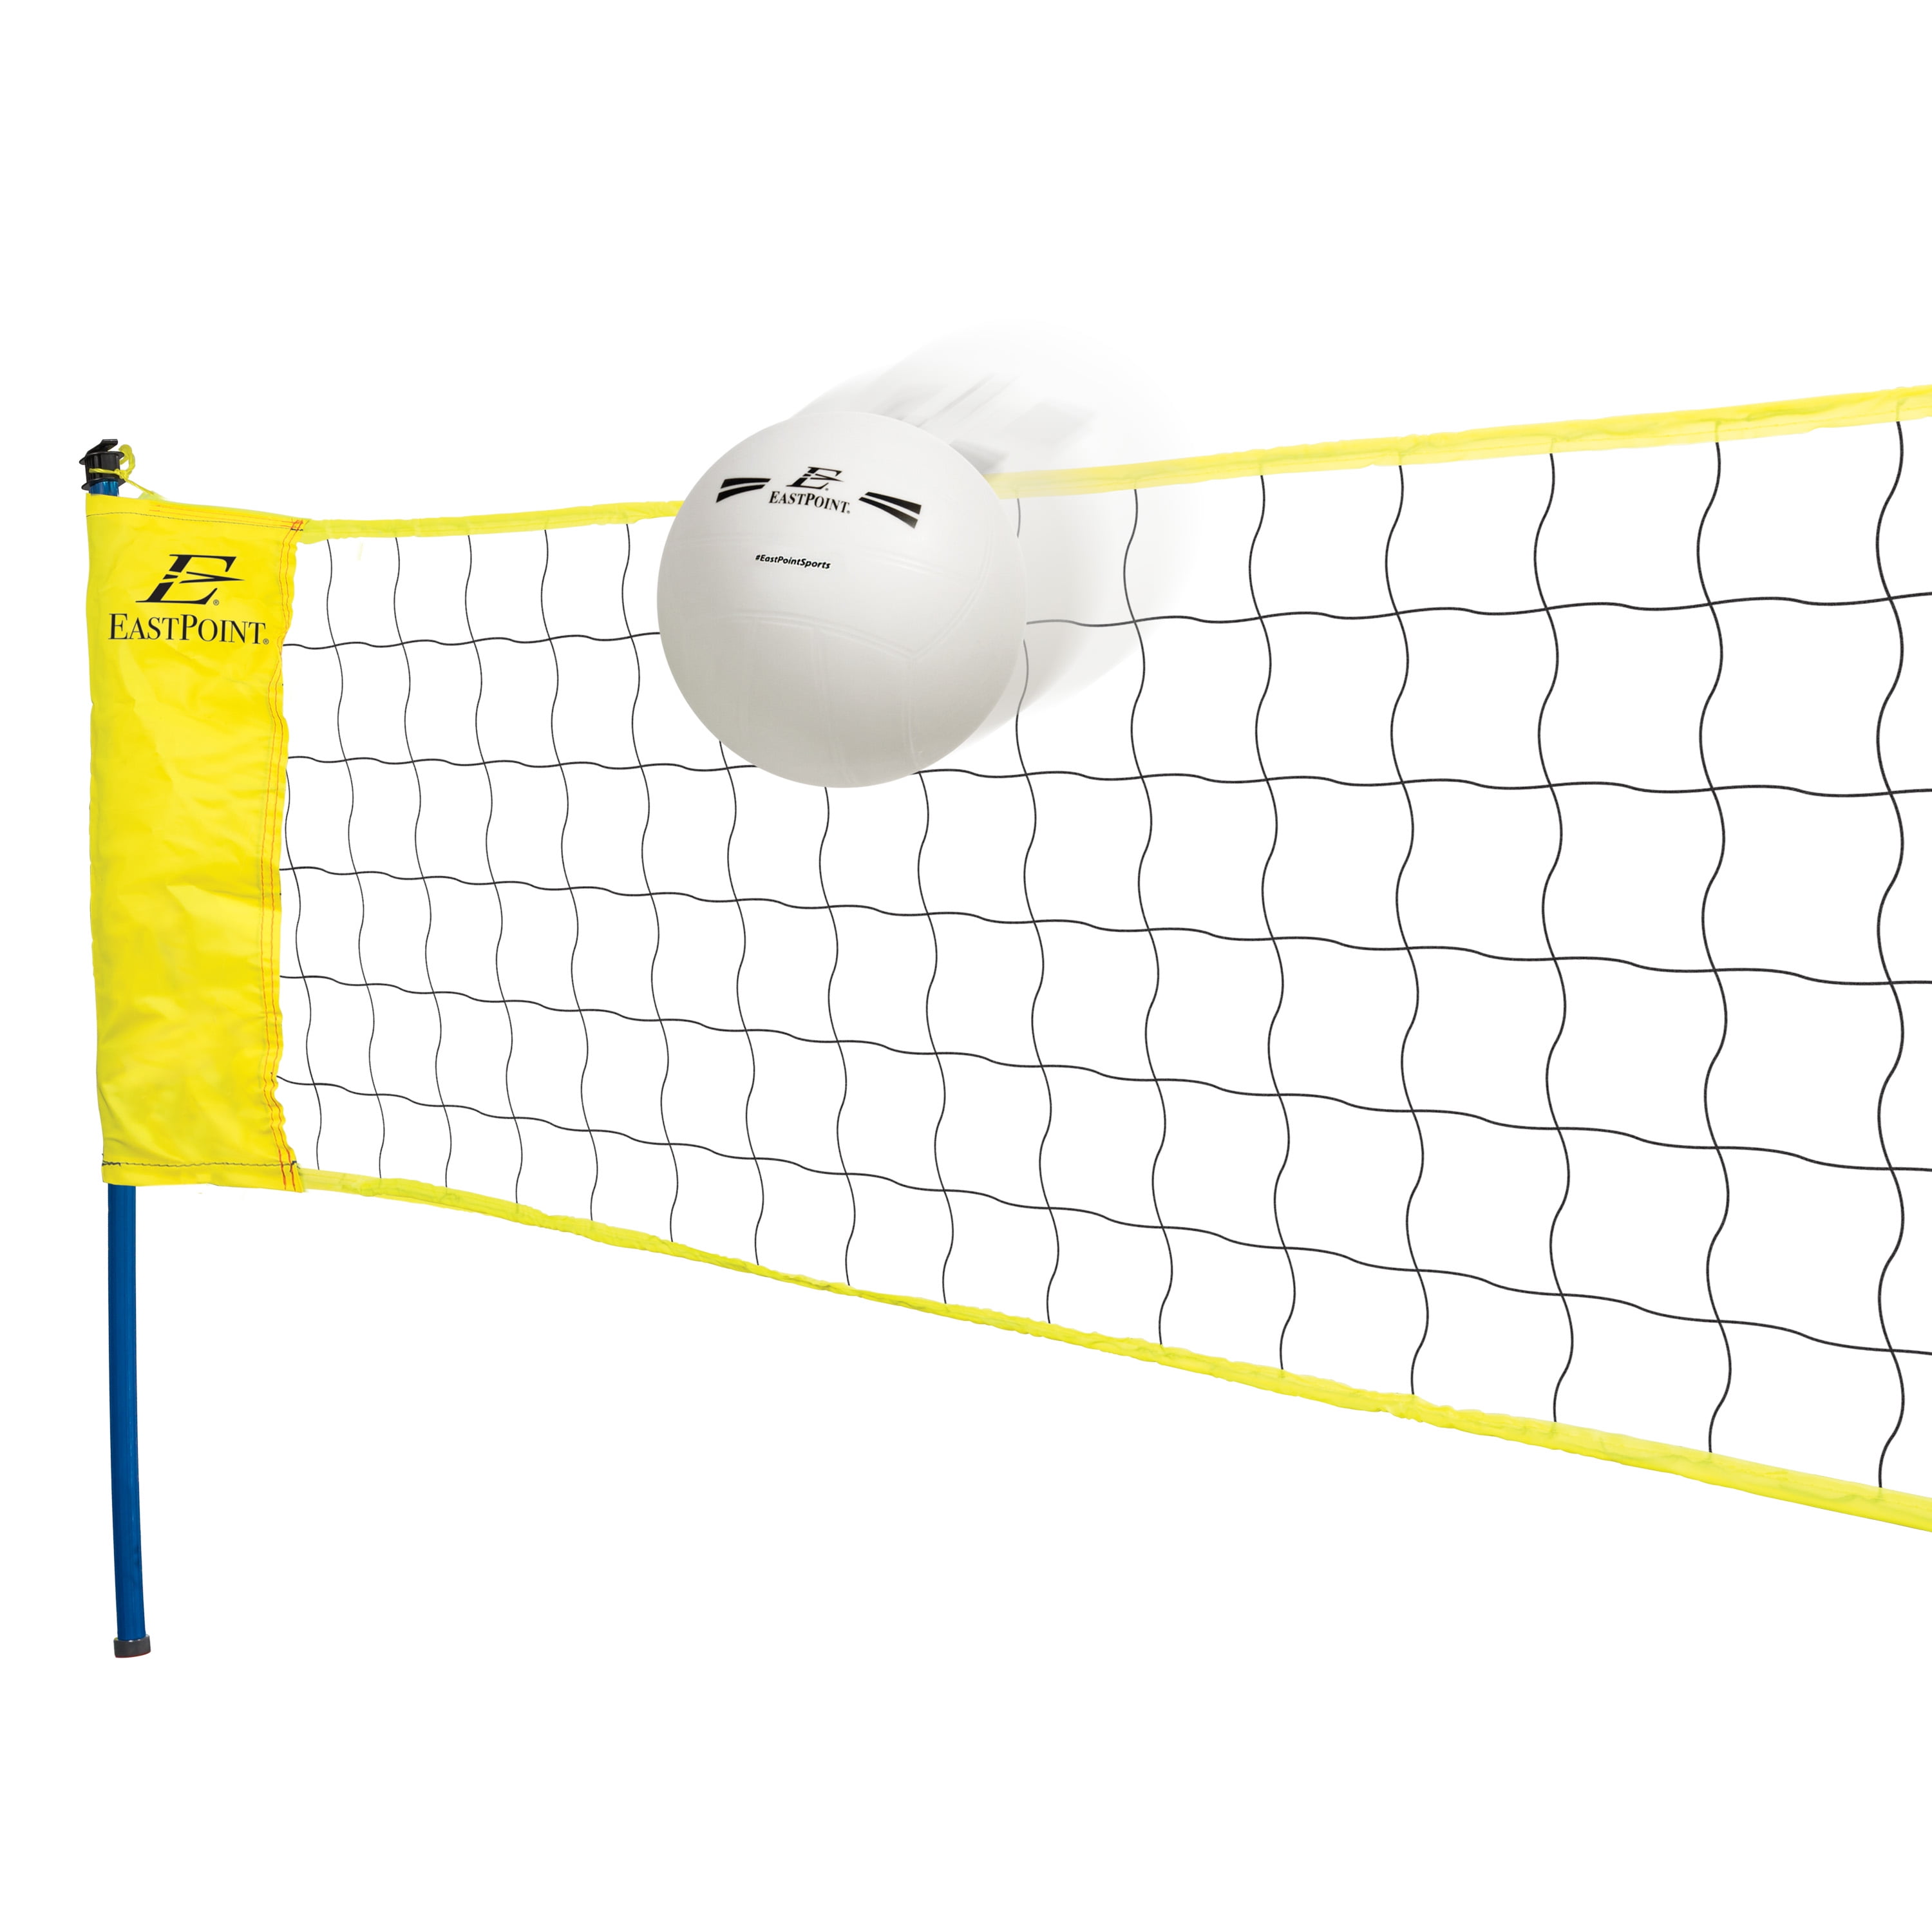 EastPoint 1123890 Easy Set-up Volleyball Set Yellow for sale online 